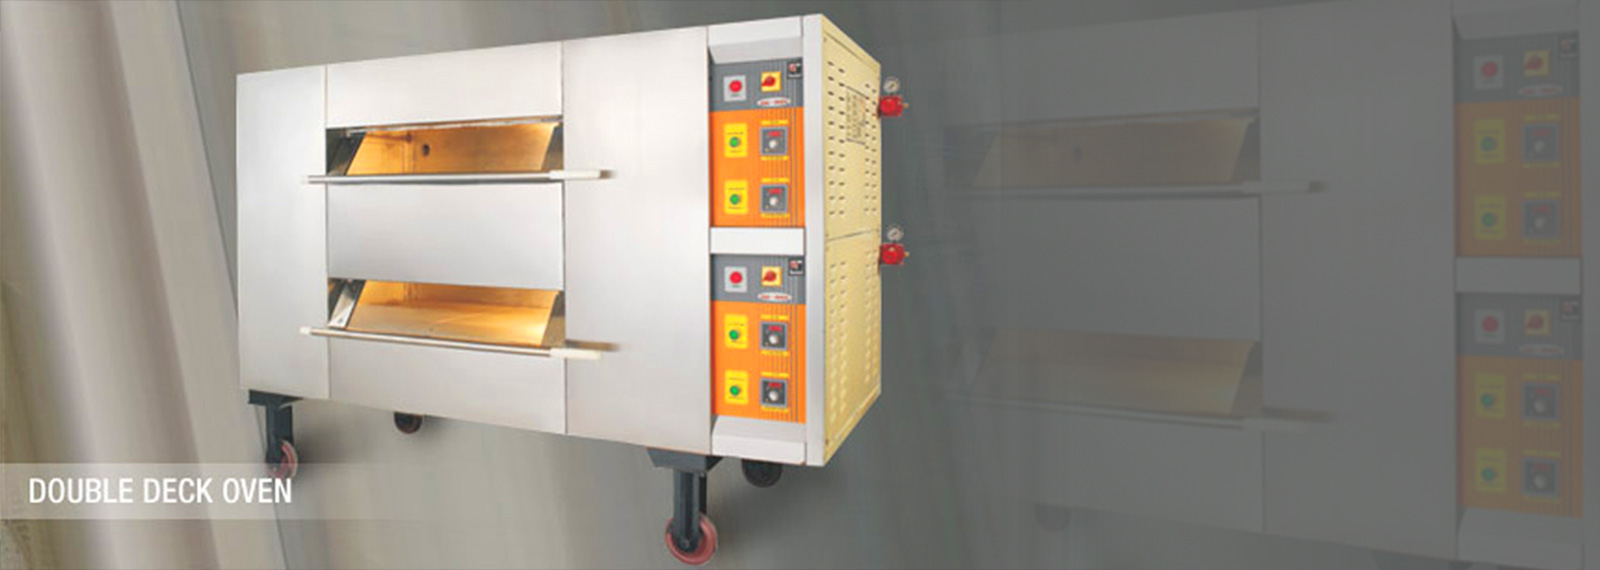 Bakery Oven Manufacturers in Hyderabad